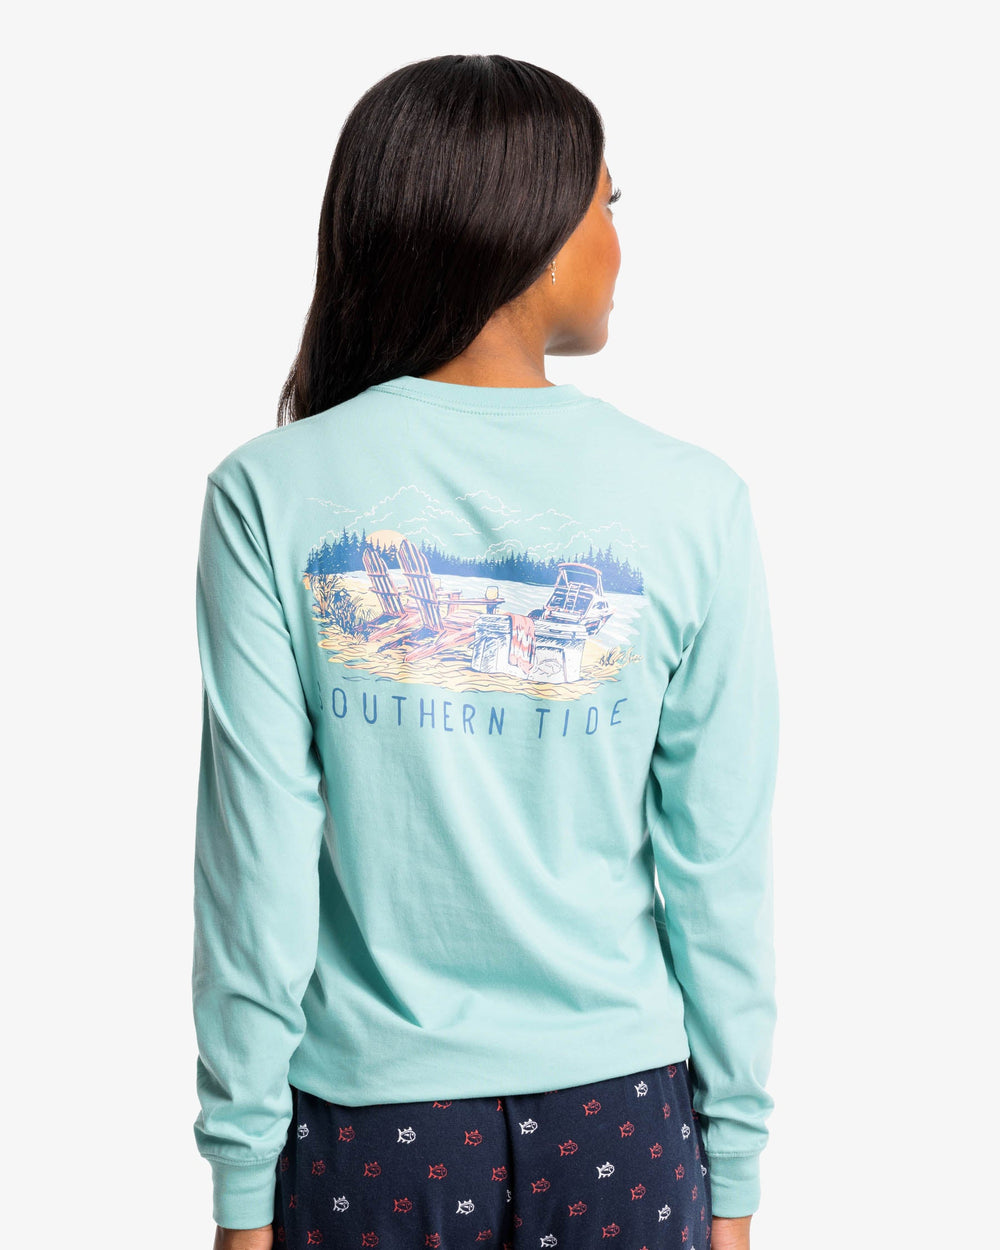 The back view of the Lakeside Picnic Long Sleeve T-Shirt by Southern Tide - Agate Green